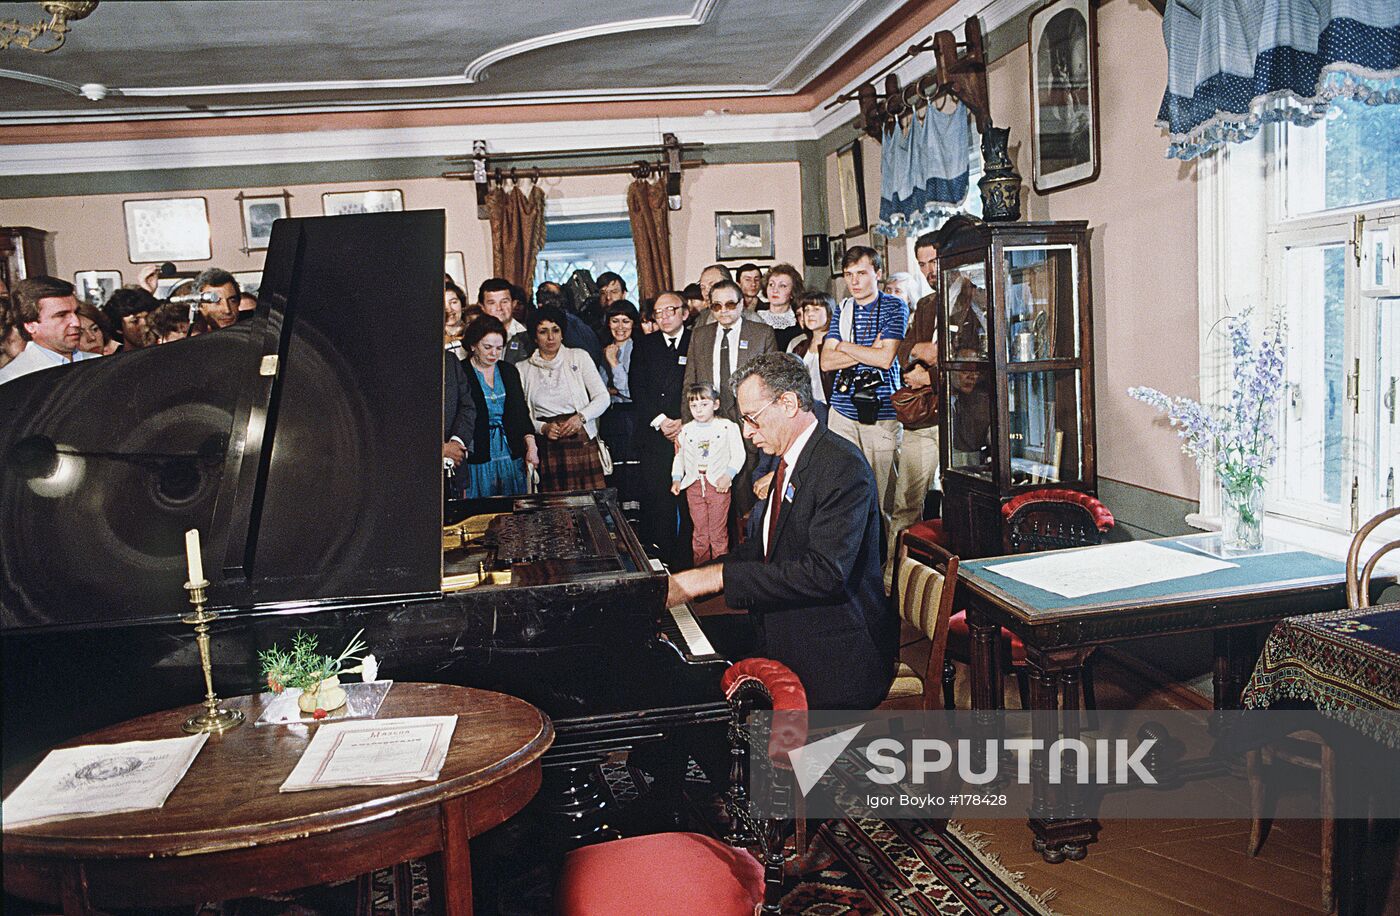 Klin Tchaikovsky House-Museum pianist Pollack United States